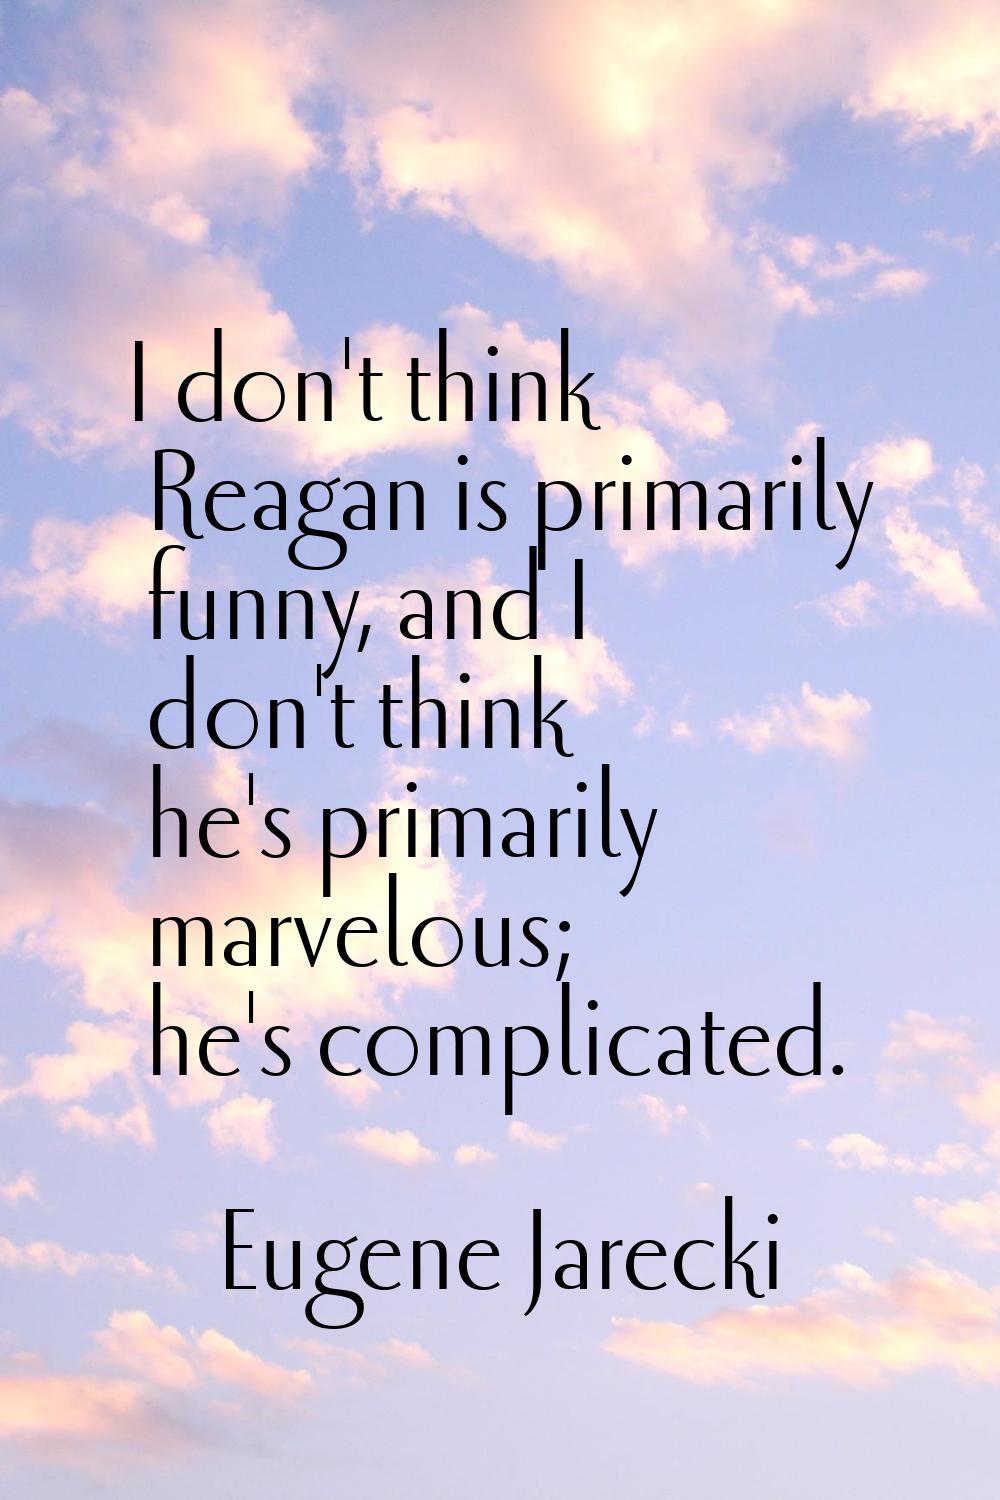 I don't think Reagan is primarily funny, and I don't think he's primarily marvelous; he's complicat